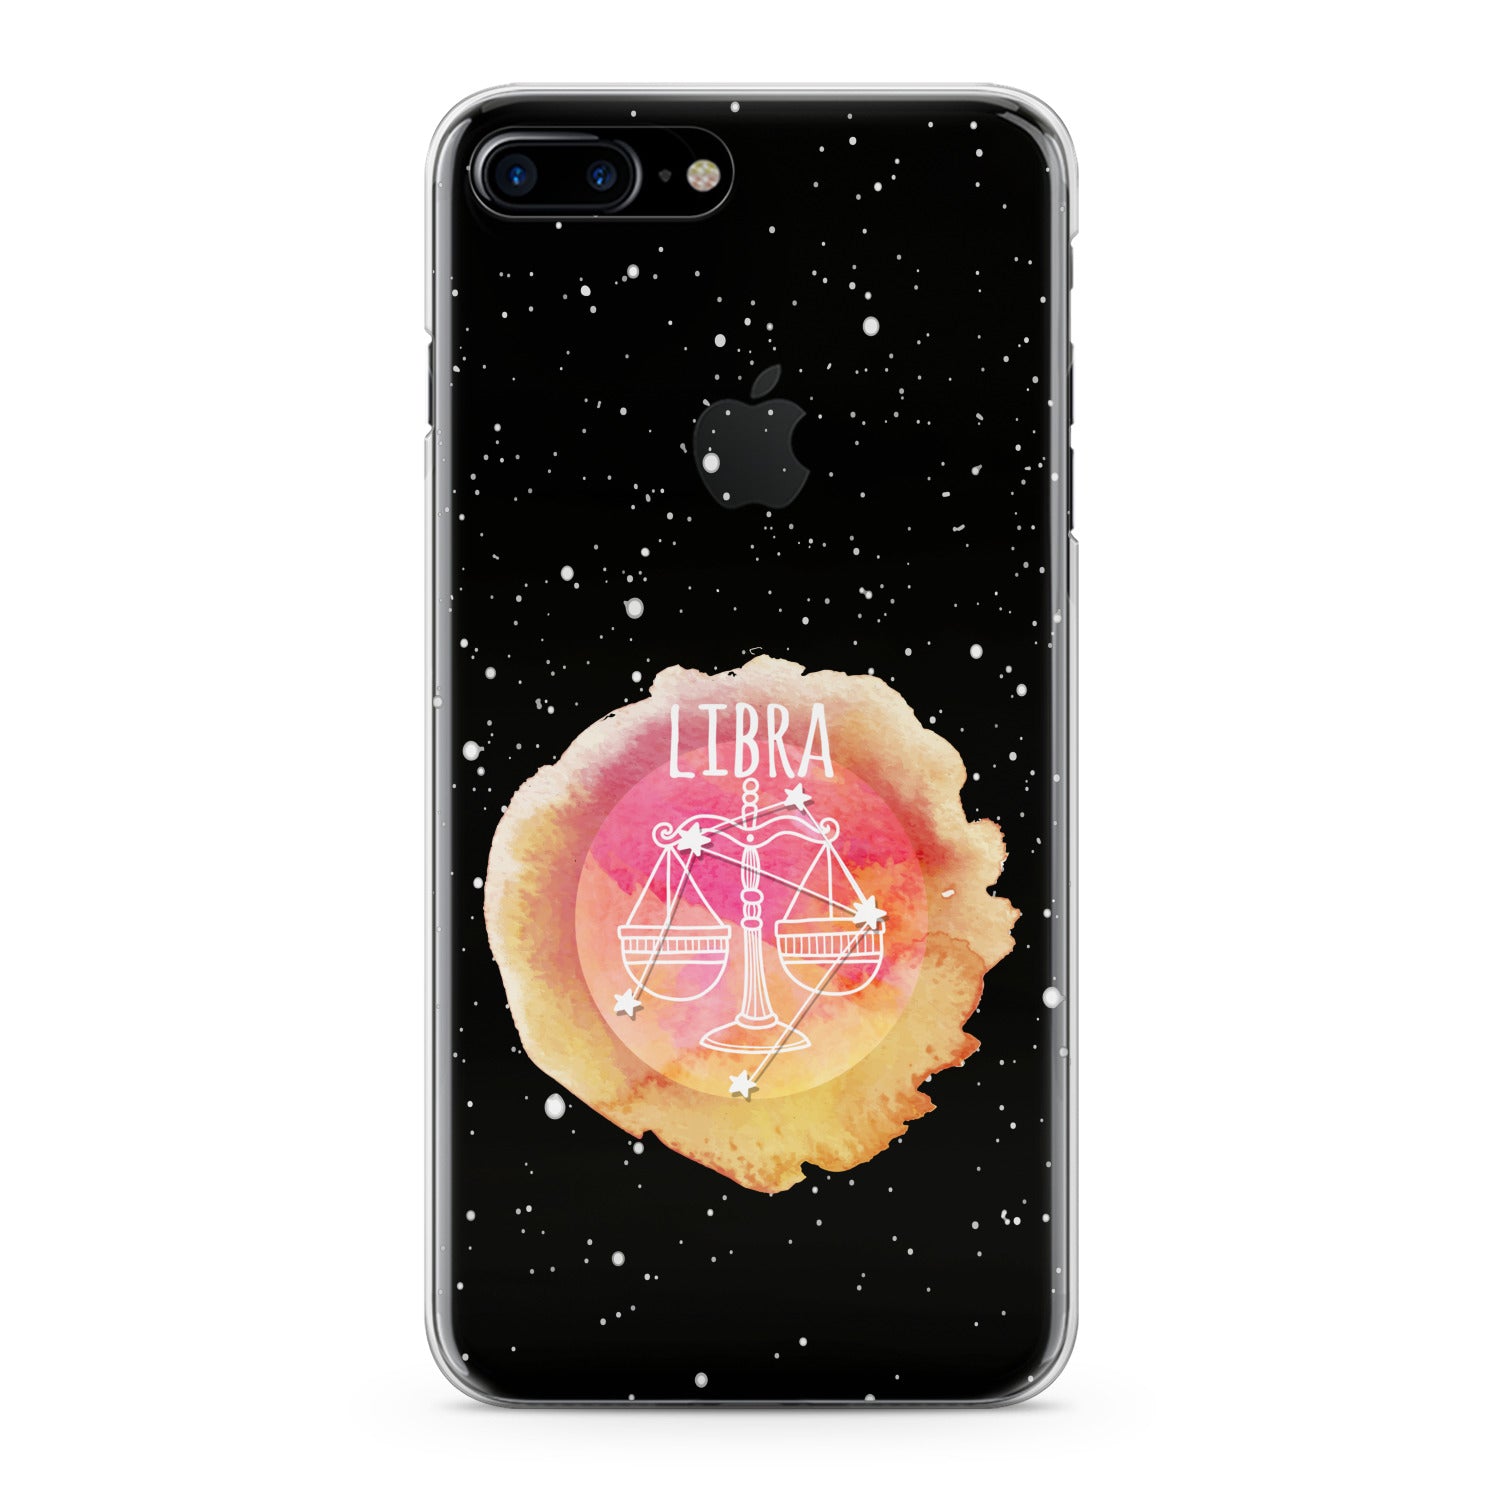 Lex Altern Libra Zodiac Phone Case for your iPhone & Android phone.